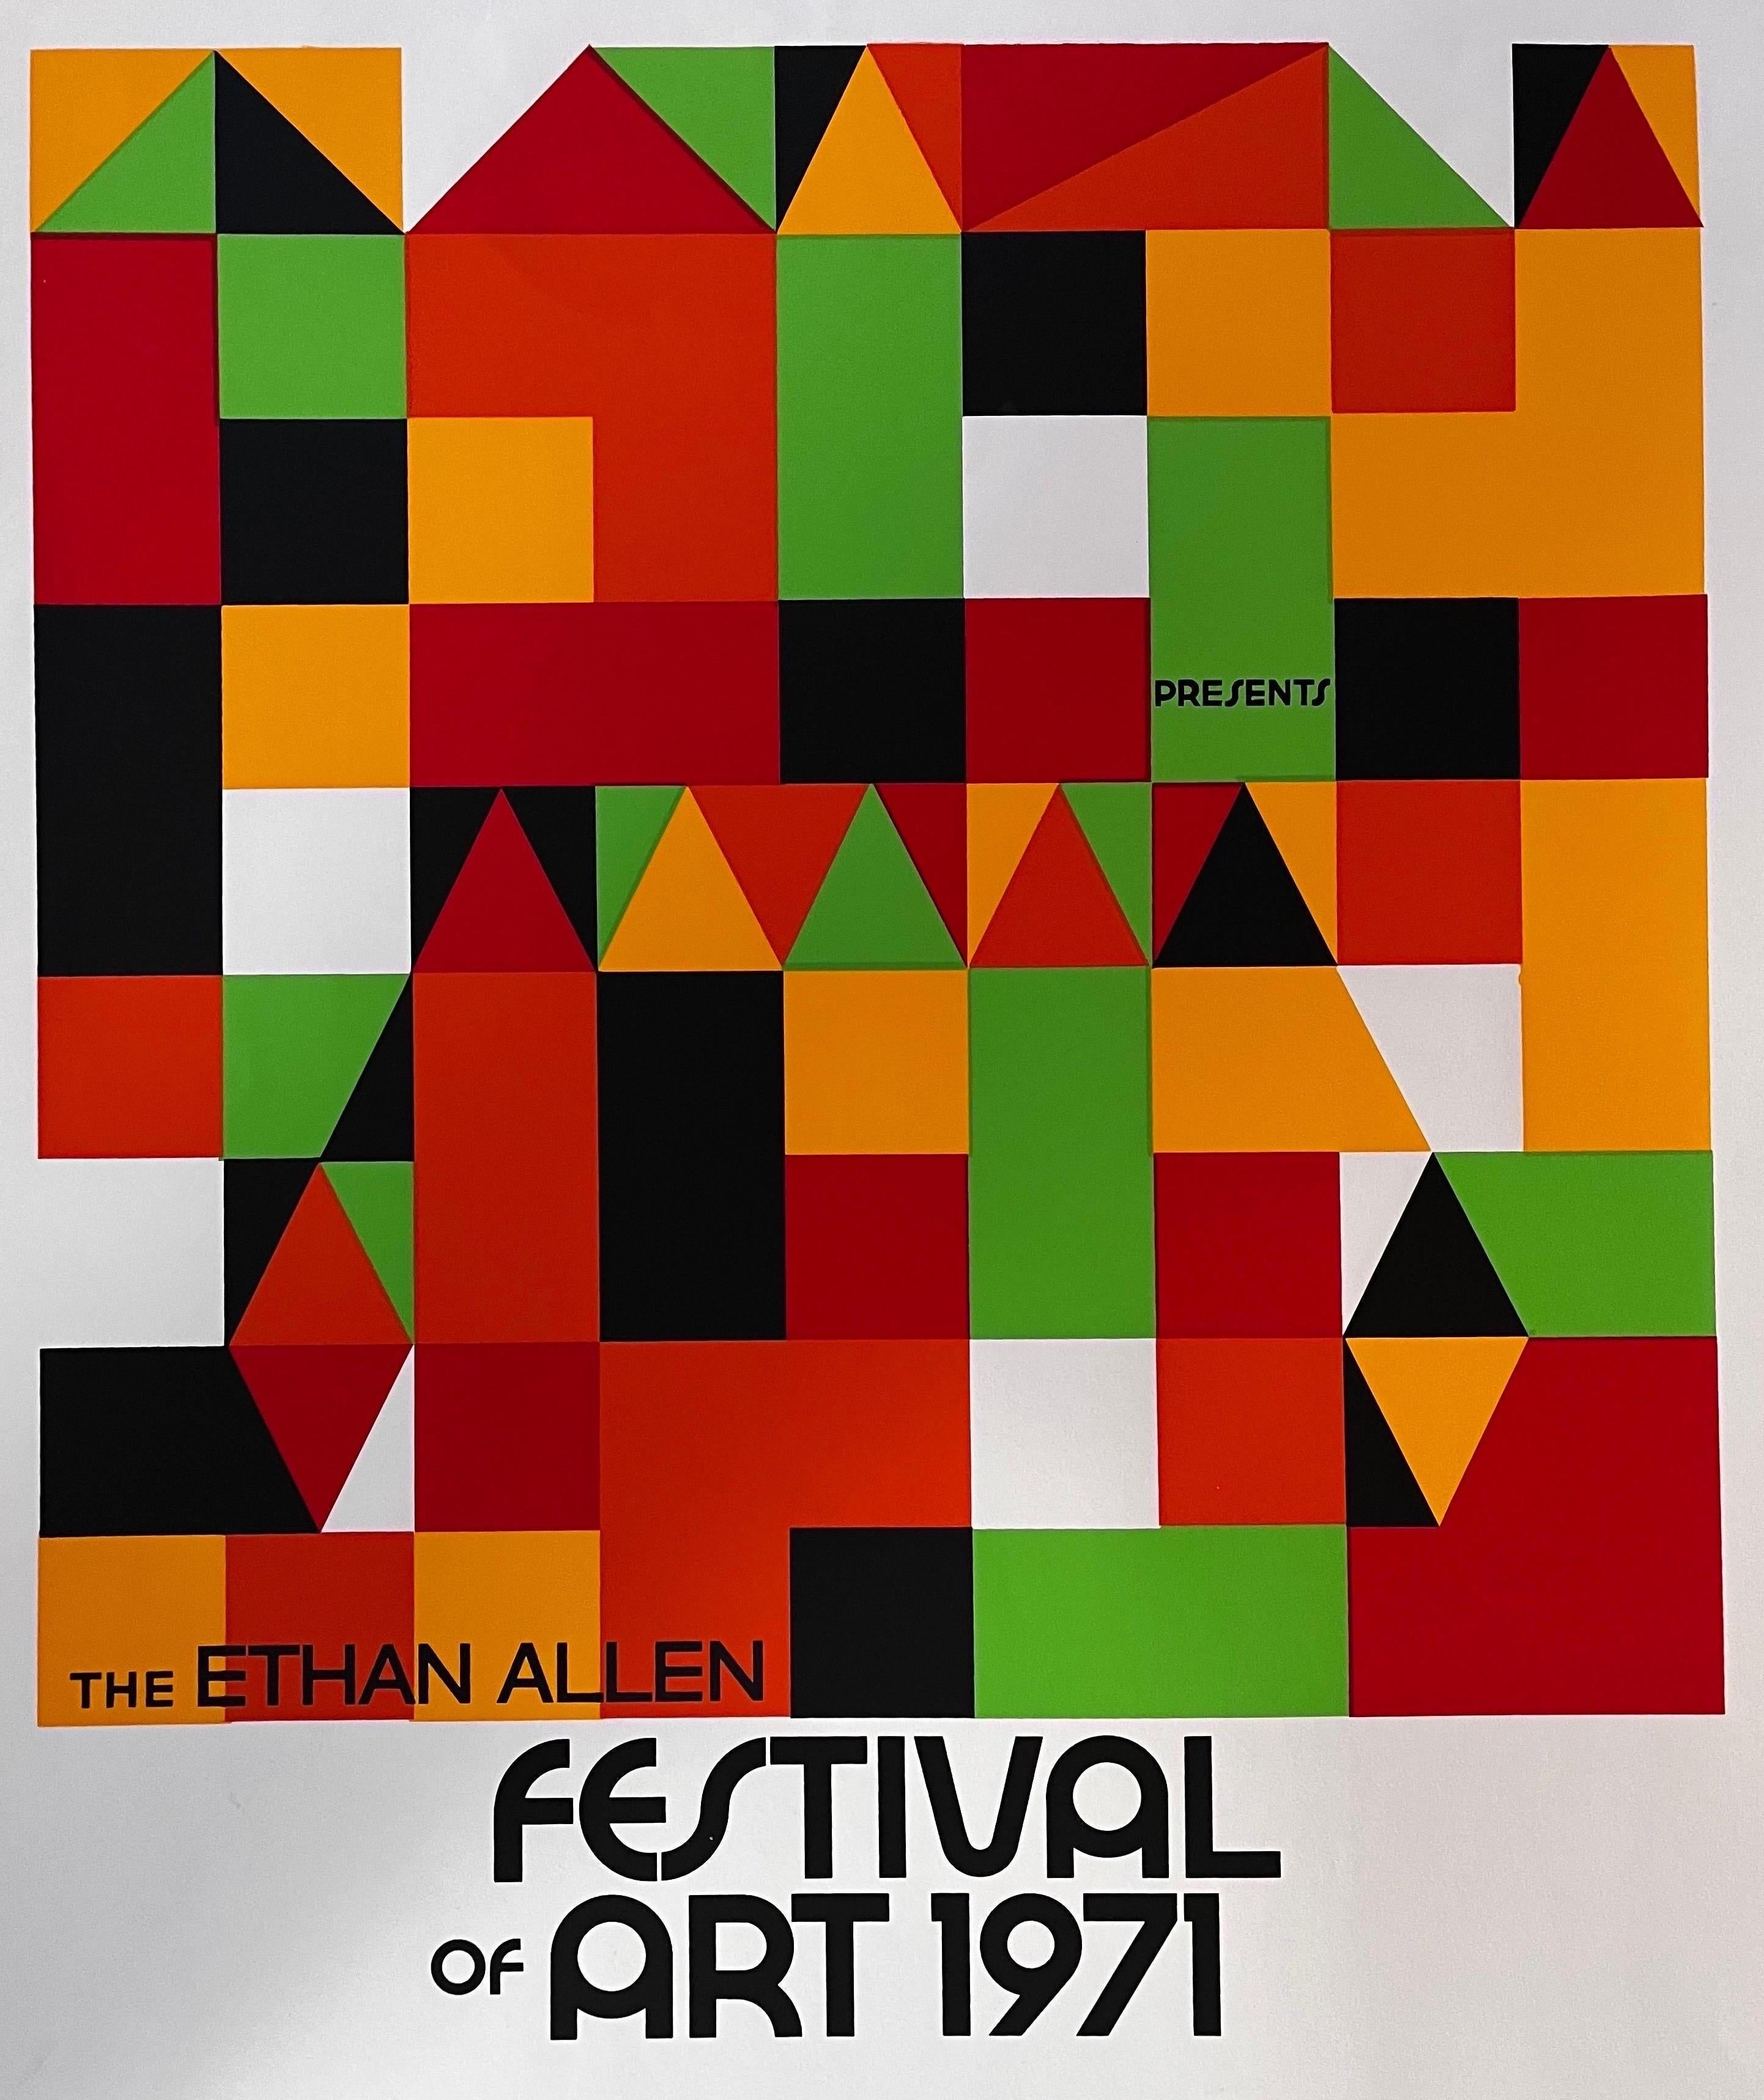 Rare Ethan Allen 1971 Festival of Art Lithograph / Poster
(have not been able to find another example of this print)

great color - great mystery.